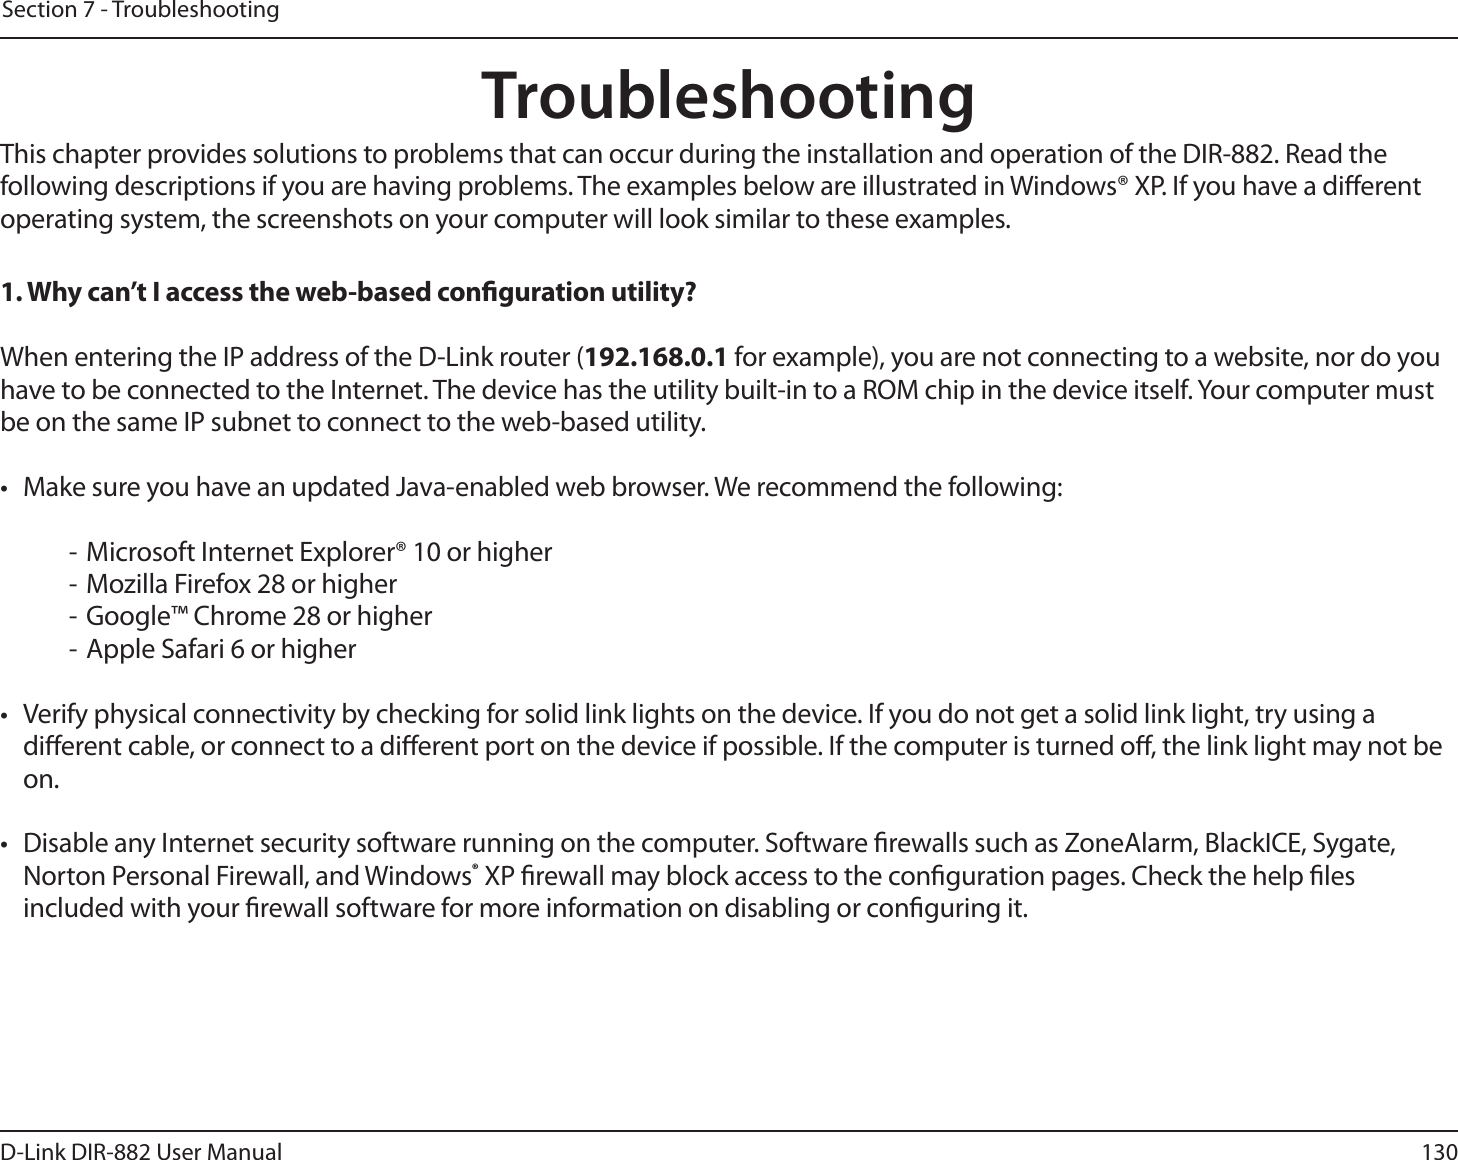 130D-Link DIR-882 User ManualSection 7 - TroubleshootingTroubleshootingThis chapter provides solutions to problems that can occur during the installation and operation of the DIR-882. Read the following descriptions if you are having problems. The examples below are illustrated in Windows® XP. If you have a dierent operating system, the screenshots on your computer will look similar to these examples.1. Why can’t I access the web-based conguration utility?When entering the IP address of the D-Link router (192.168.0.1 for example), you are not connecting to a website, nor do you have to be connected to the Internet. The device has the utility built-in to a ROM chip in the device itself. Your computer must be on the same IP subnet to connect to the web-based utility. t .BLFTVSFZPVIBWFBOVQEBUFE+BWBFOBCMFEXFCCSPXTFS8FSFDPNNFOEUIFGPMMPXJOH - Microsoft Internet Explorer® 10 or higher- Mozilla Firefox 28 or higher- Google™ Chrome 28 or higher- Apple Safari 6 or highert 7FSJGZQIZTJDBMDPOOFDUJWJUZCZDIFDLJOHGPSTPMJEMJOLMJHIUTPOUIFEFWJDF*GZPVEPOPUHFUBTPMJEMJOLMJHIUUSZVTJOHBdierent cable, or connect to a dierent port on the device if possible. If the computer is turned o, the link light may not be on.t %JTBCMFBOZ*OUFSOFUTFDVSJUZTPGUXBSFSVOOJOHPOUIFDPNQVUFS4PGUXBSFöSFXBMMTTVDIBT;POF&quot;MBSN#MBDL*$&amp;4ZHBUFNorton Personal Firewall, and Windows® XP rewall may block access to the conguration pages. Check the help les included with your rewall software for more information on disabling or conguring it.